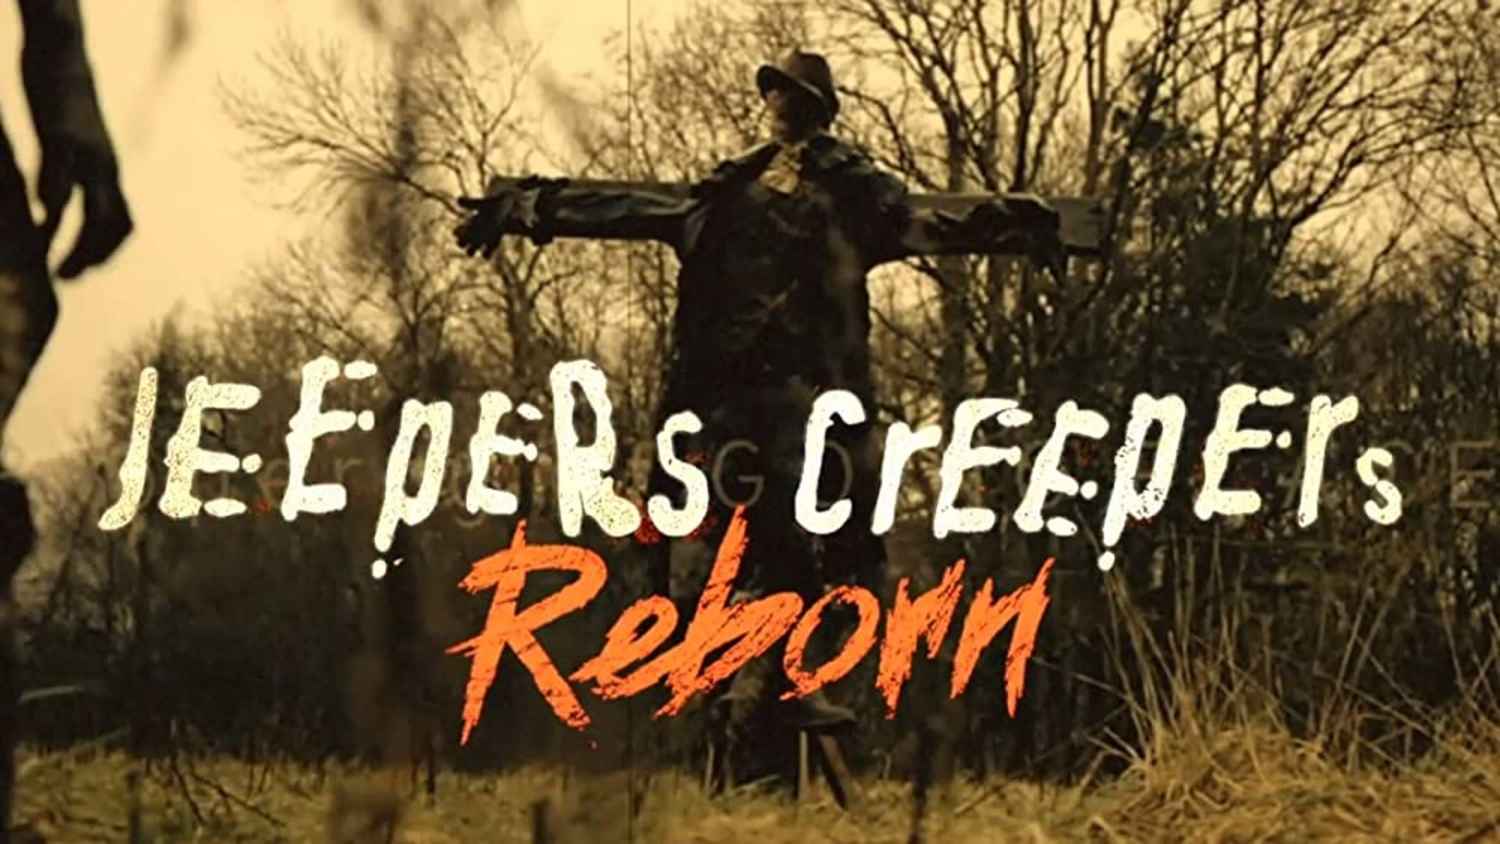 jeepers creepers 1 full movie download in english